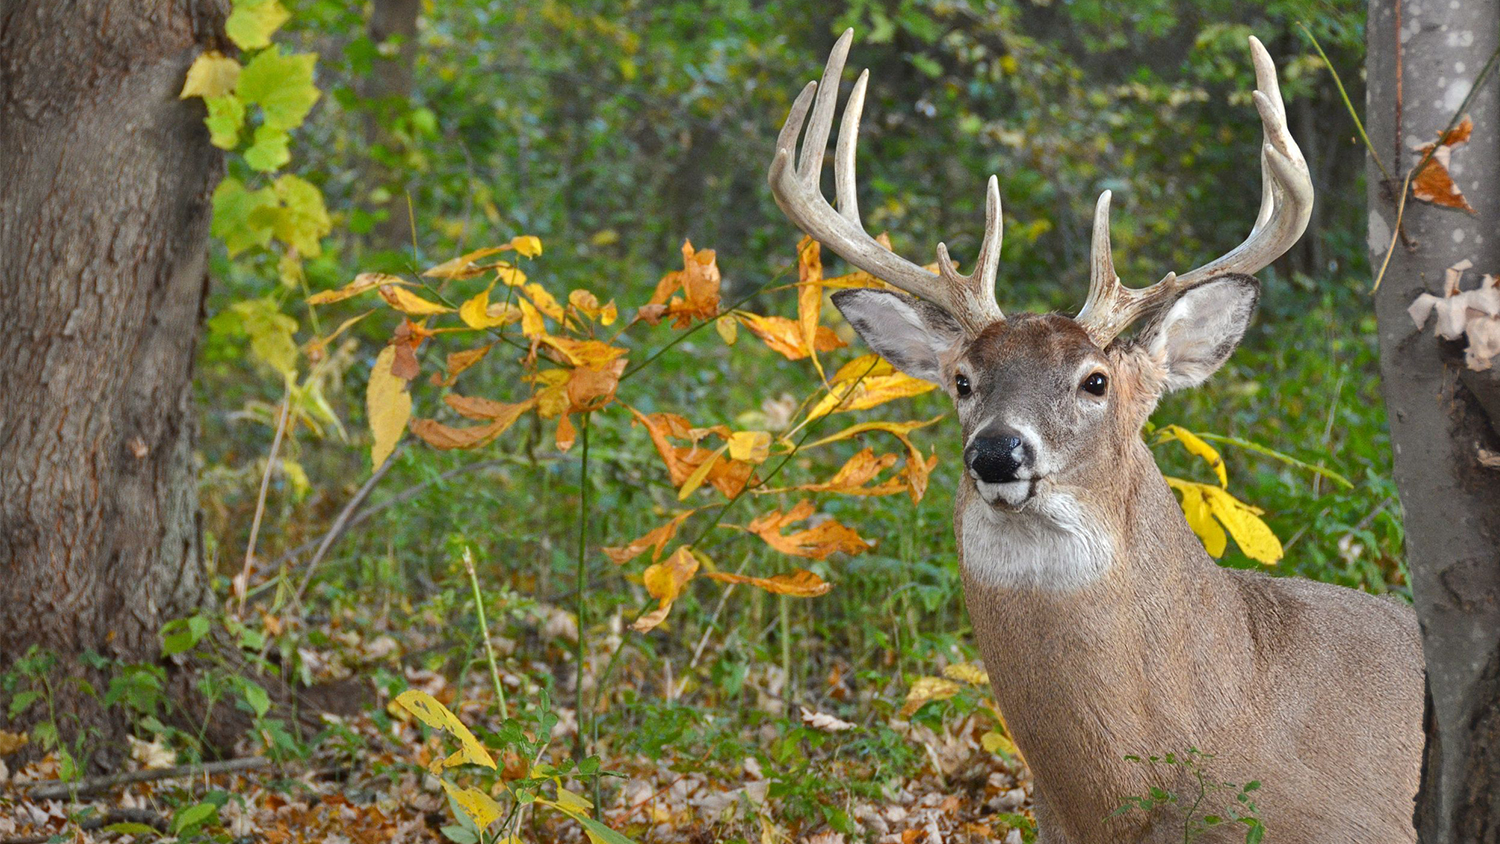 What Do Bucks and Velvet Have in Common?